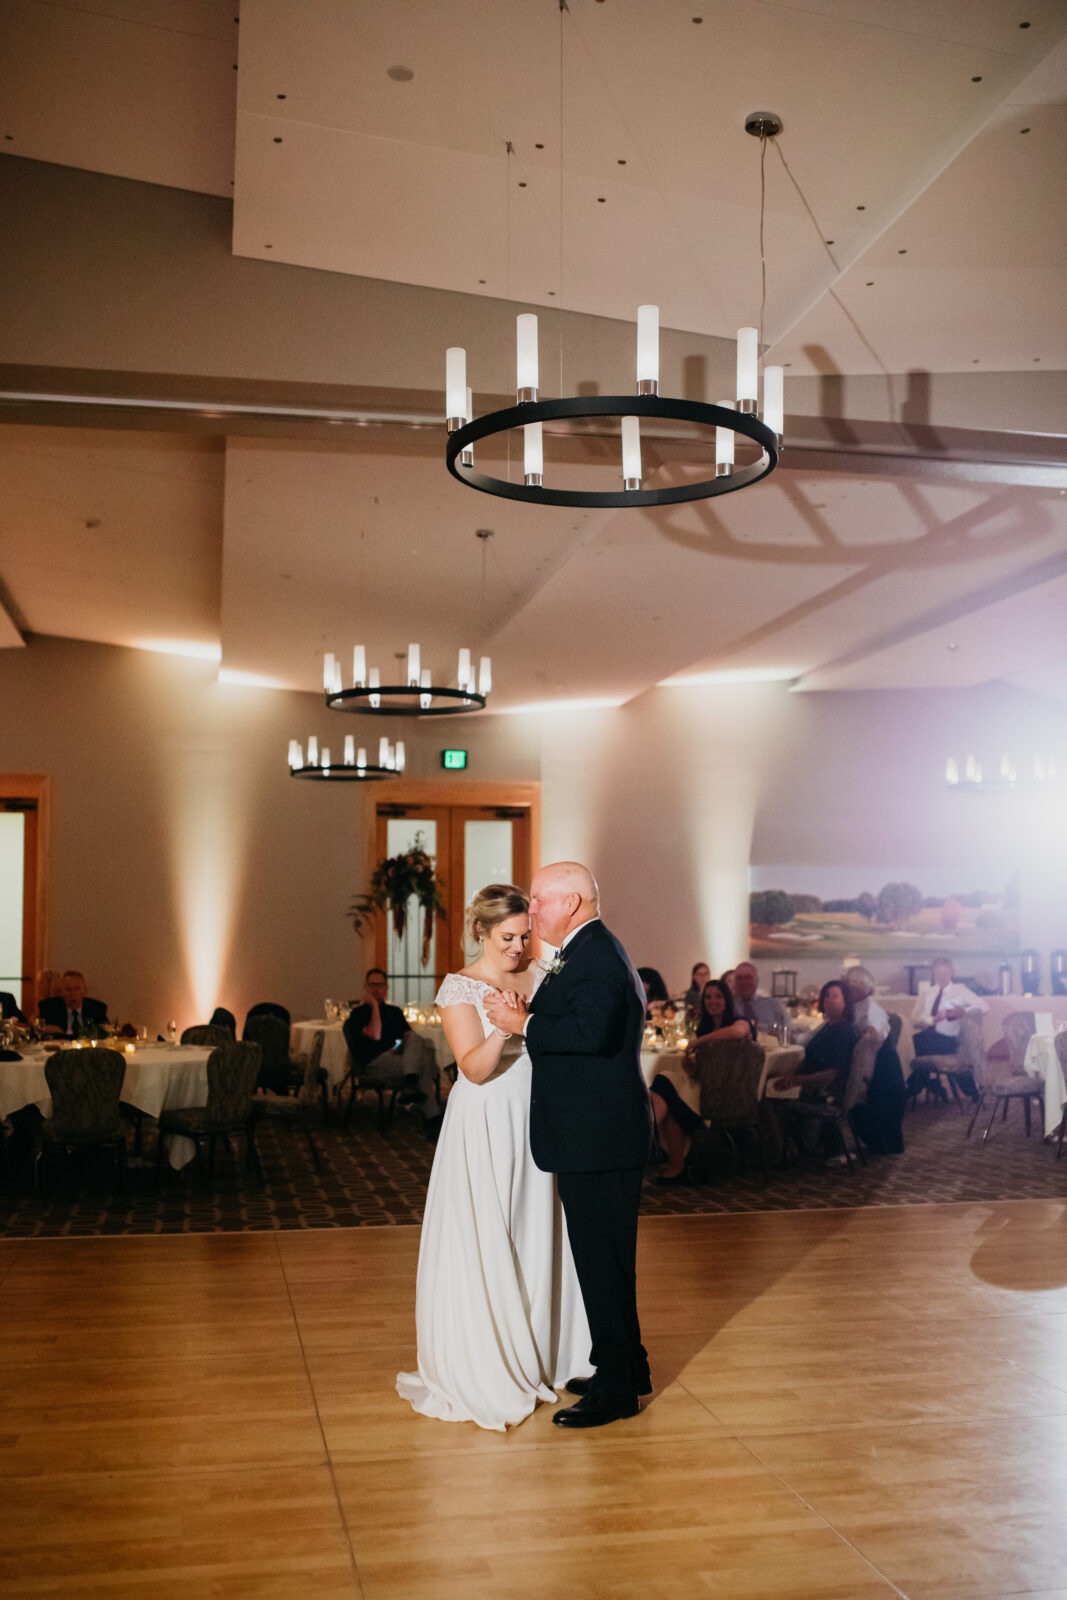 A photo of the bride and her father dancing during her wedding day at the reception